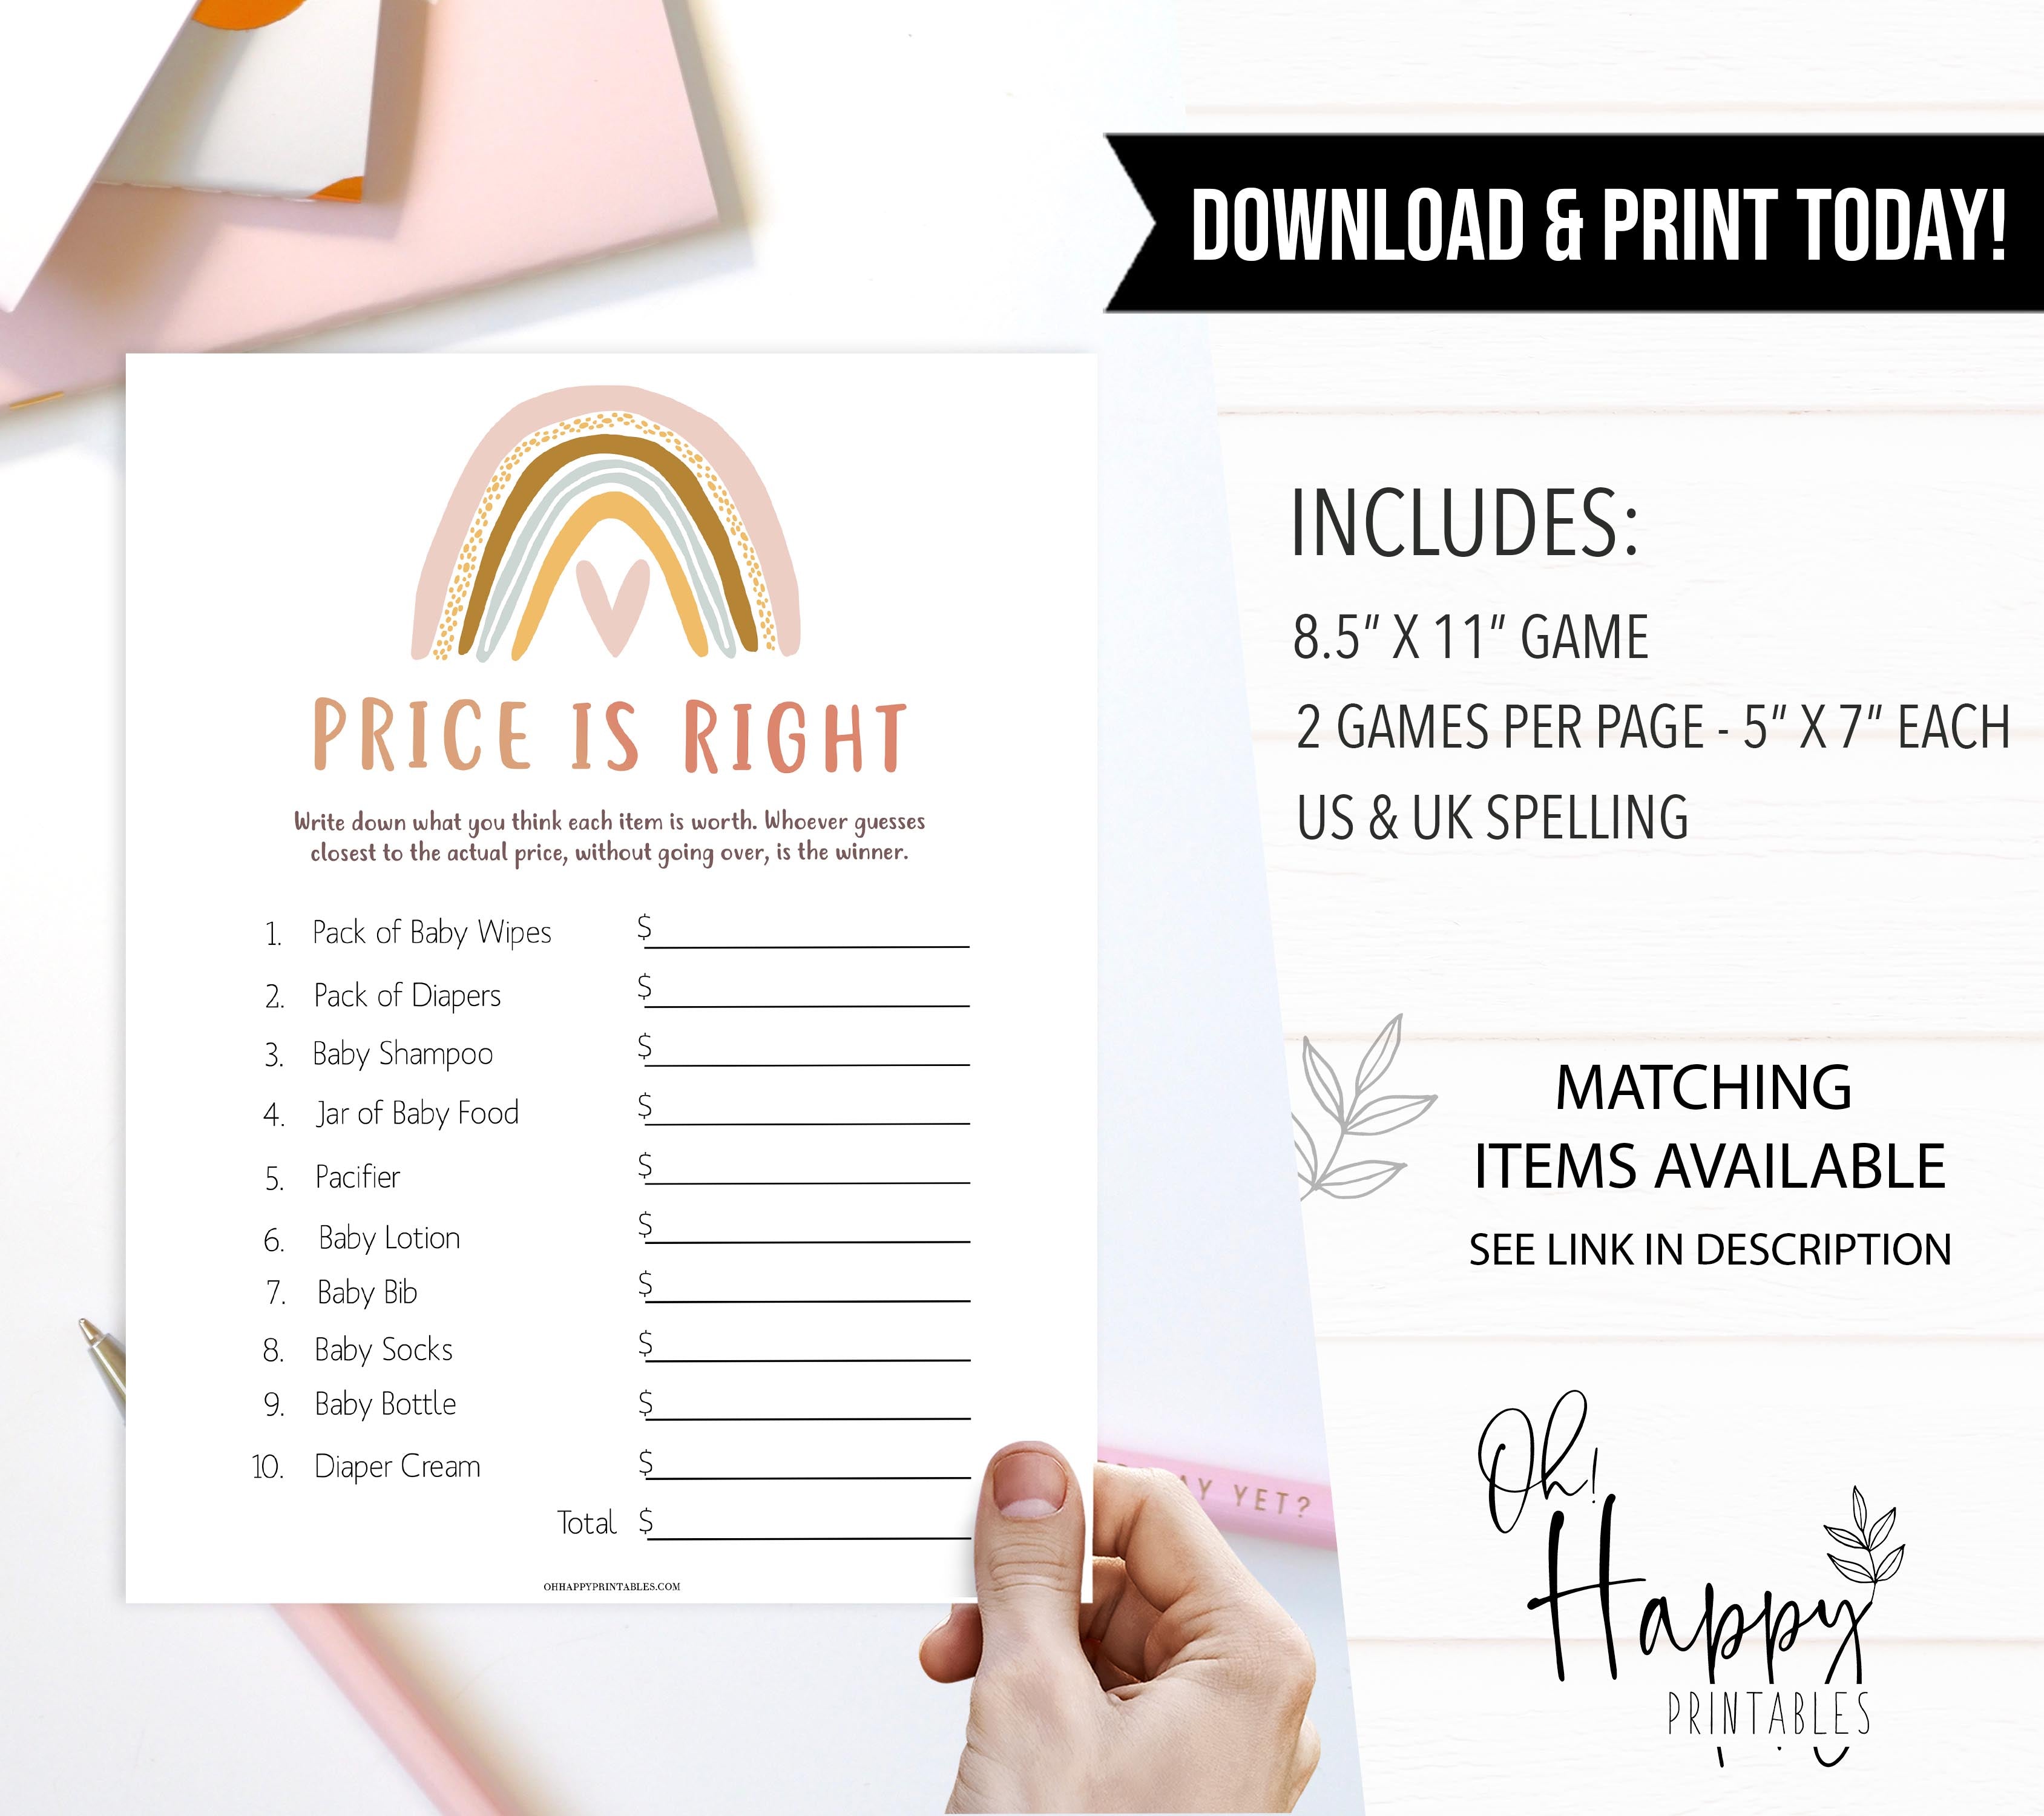 price is right baby shower games, Printable baby shower games, boho rainbow baby games, baby shower games, fun baby shower ideas, top baby shower ideas, boho rainbow baby shower, baby shower games, fun boho rainbow baby shower ideas